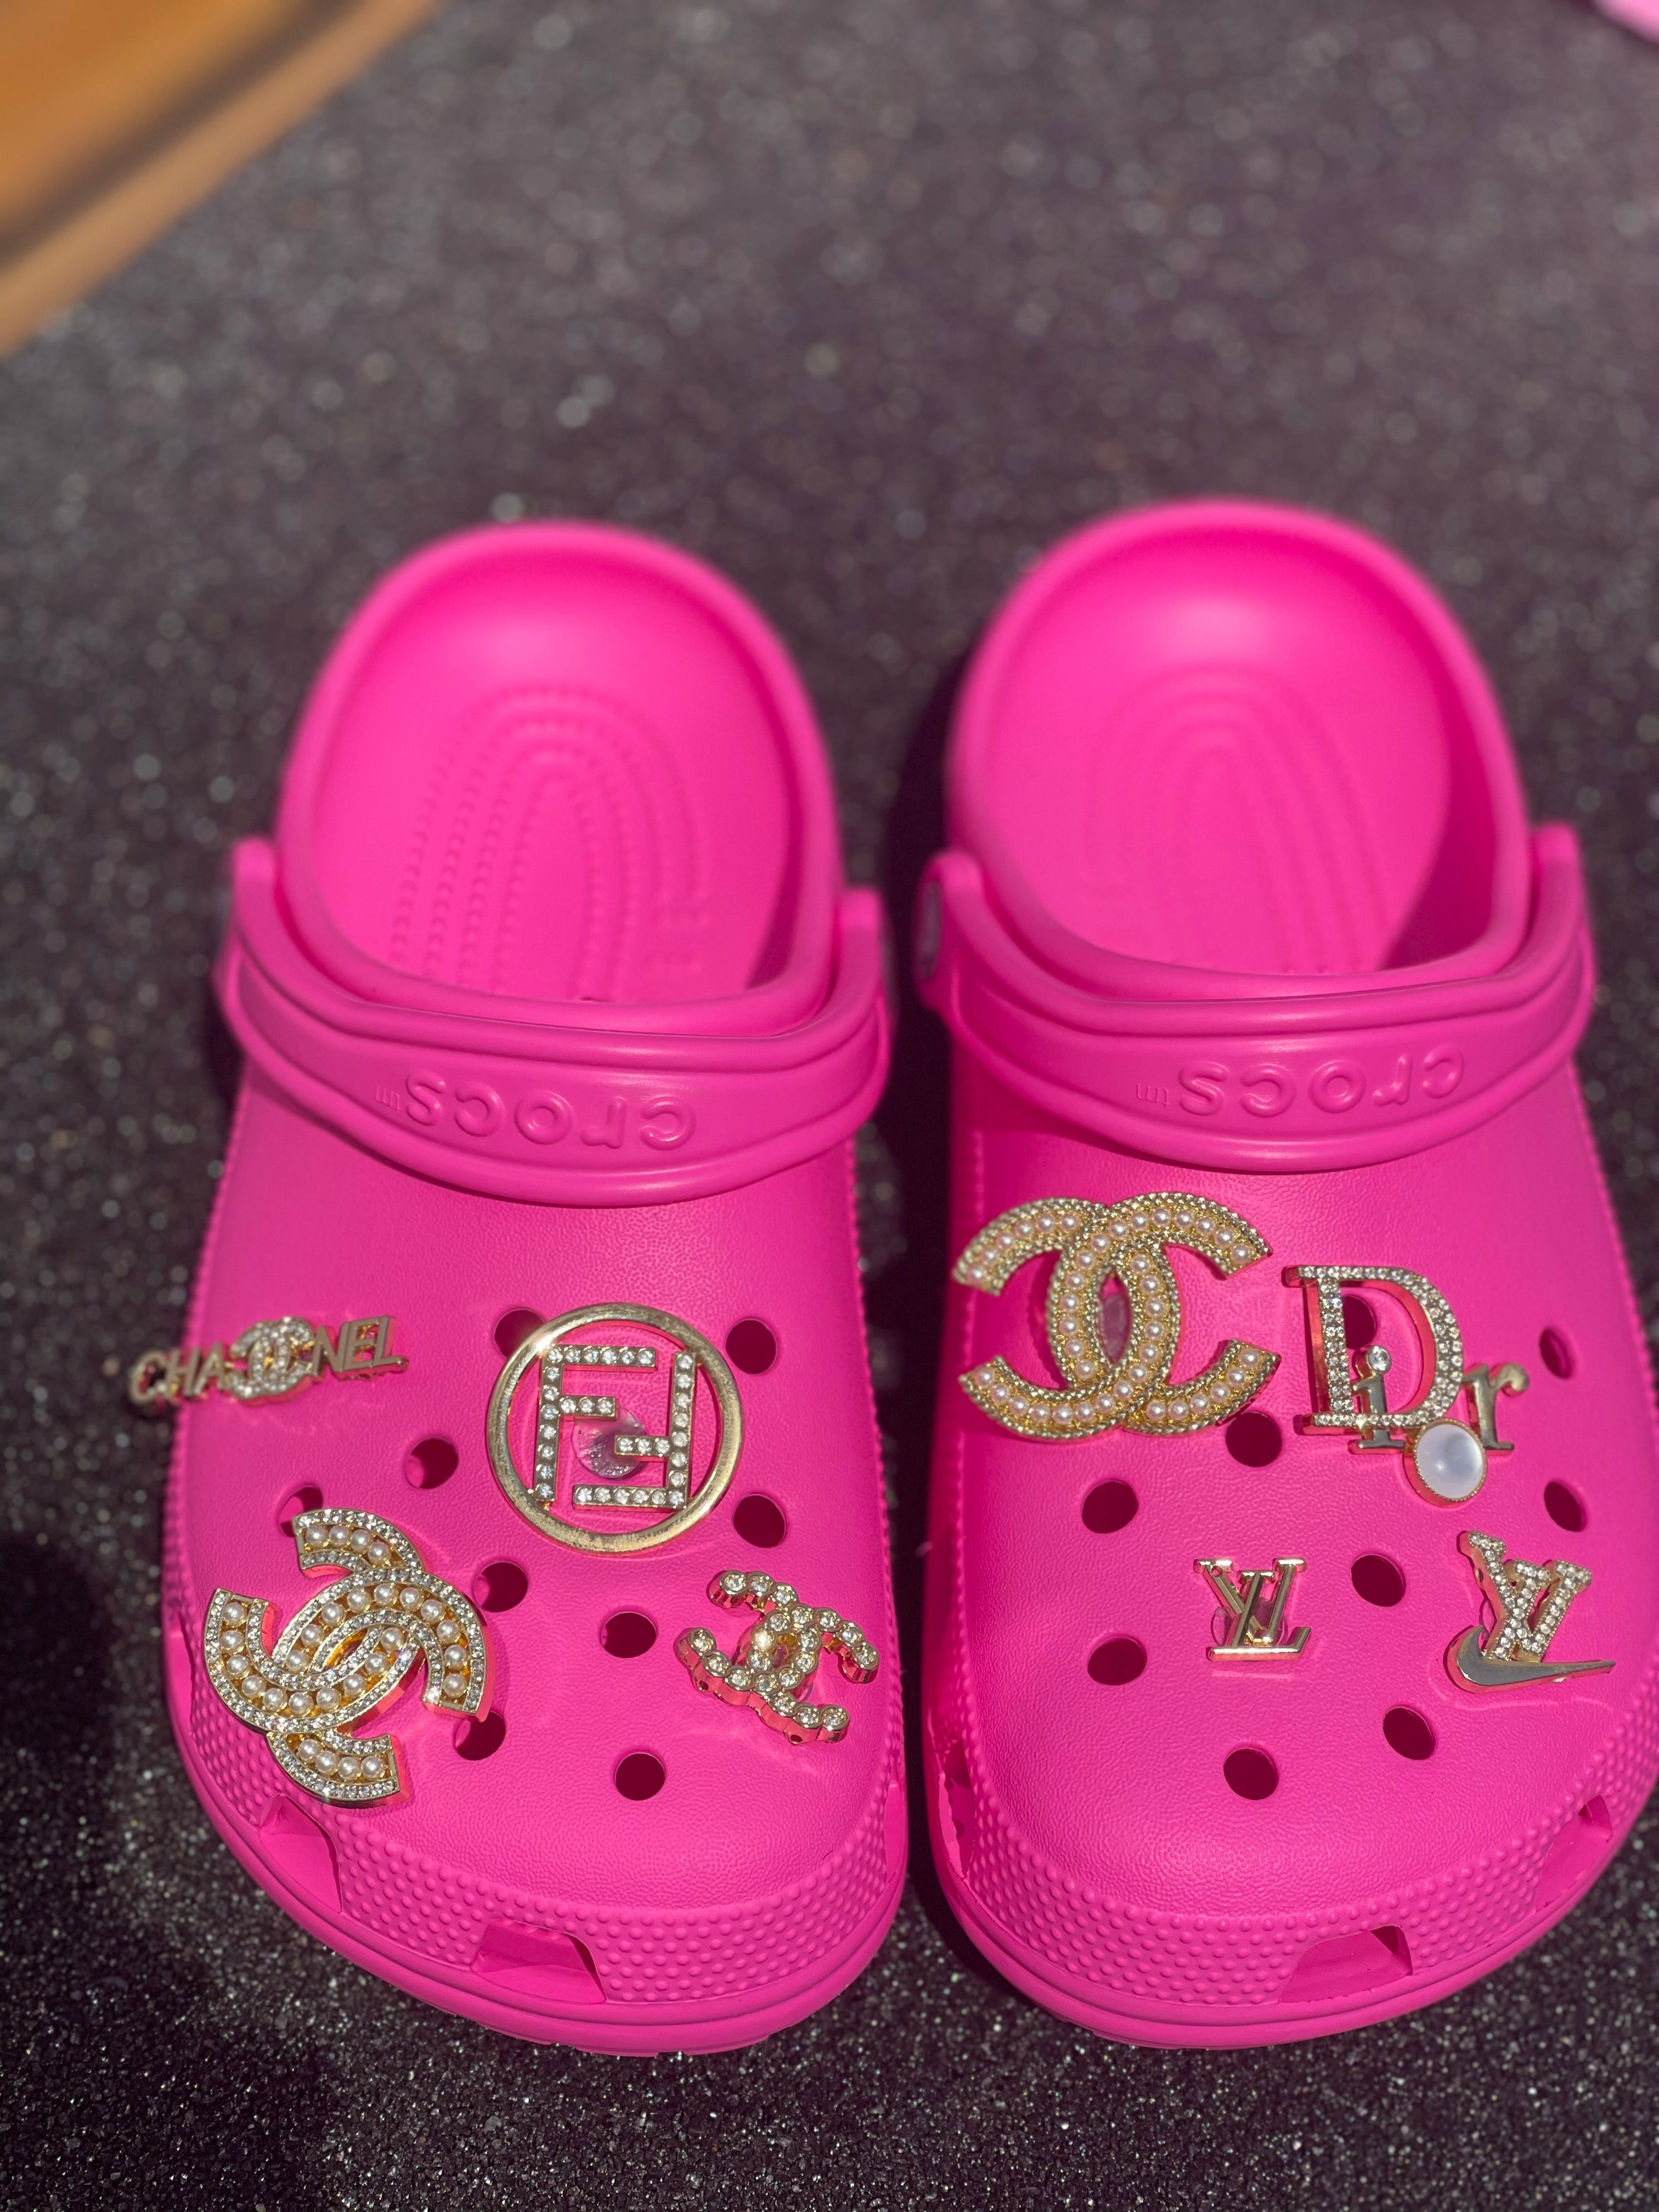 Designer Croc Charms: Elevate Your Crocs Style - Whatbehind